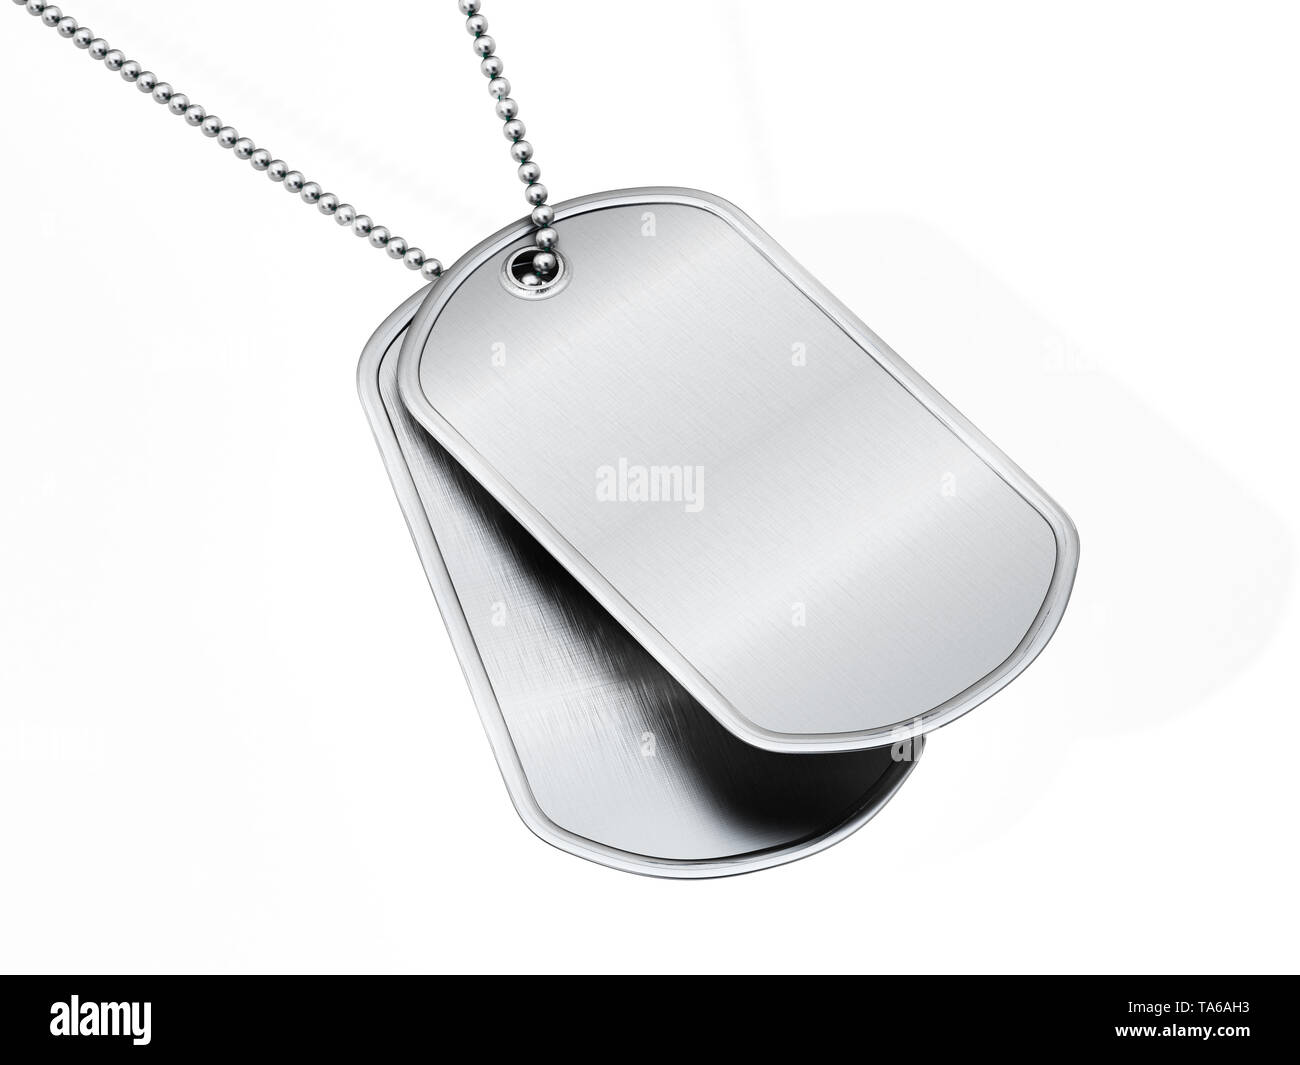 Stainless Steel Blank Military Dog Tags